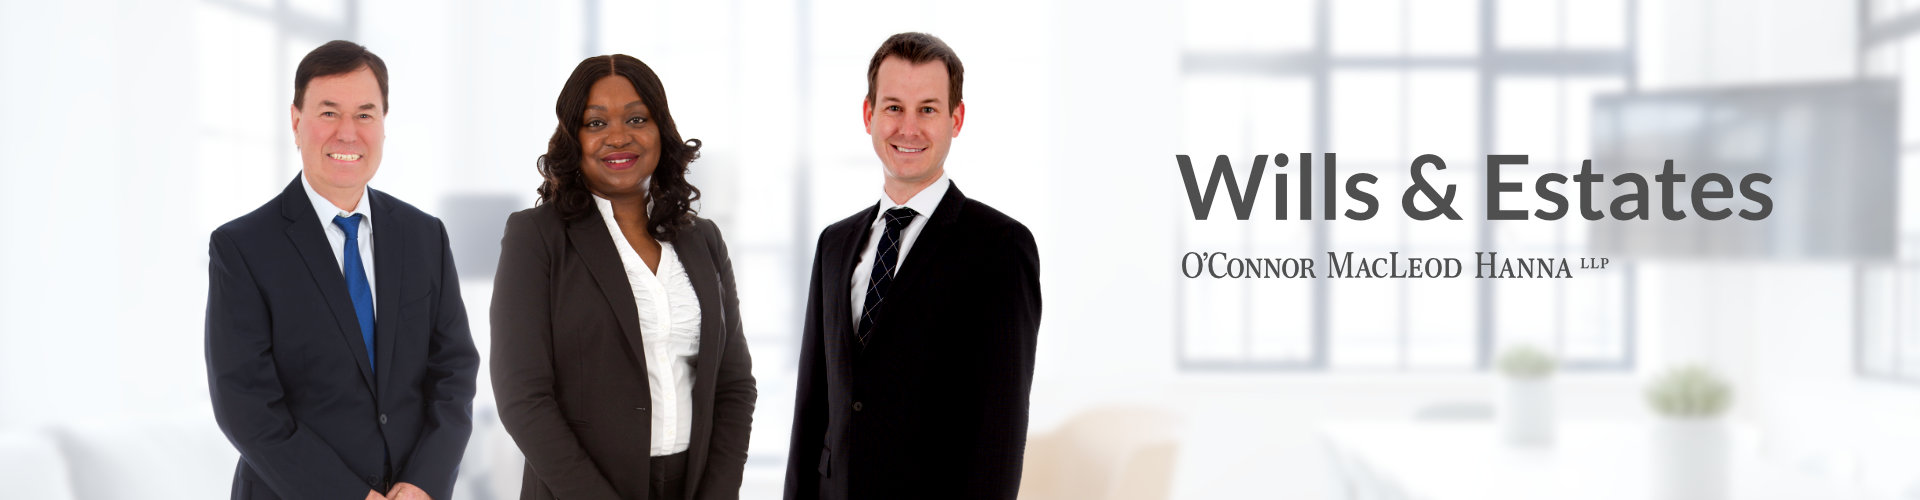 Wills & Estates Group Lawyers